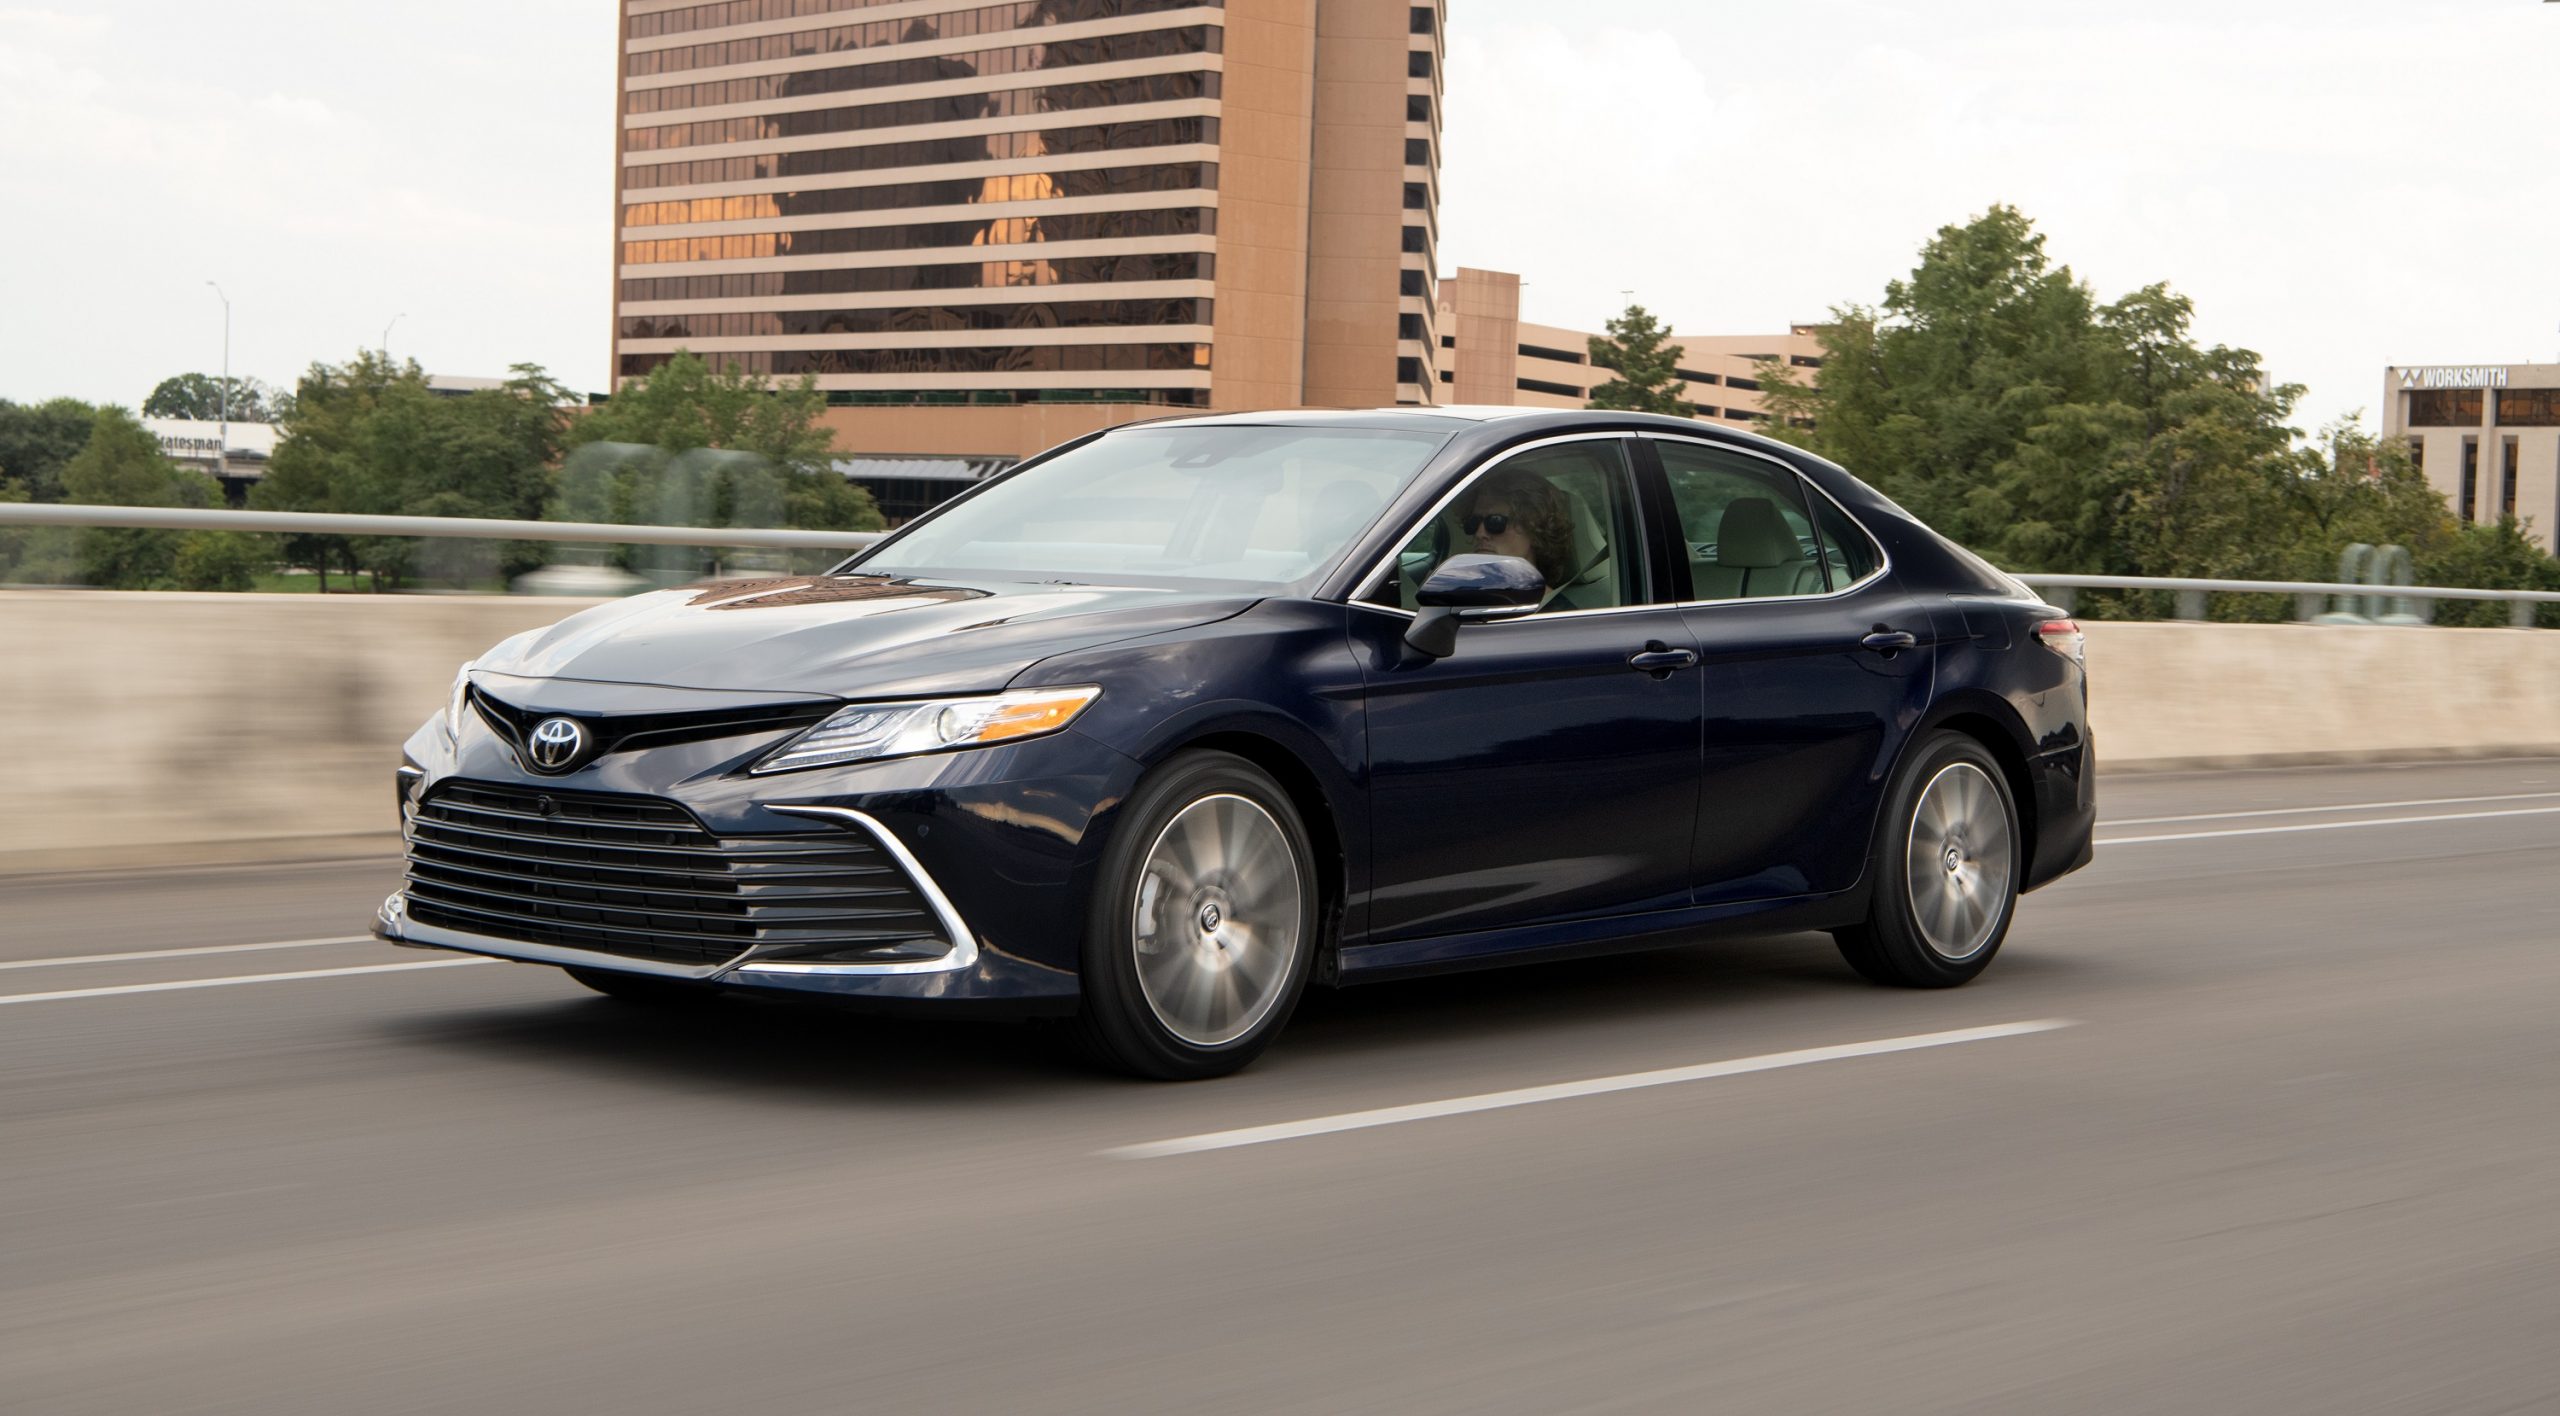 A blue 2021 Toyota Camry sedan rolls down the highway, shot from the front 3/4 angle.